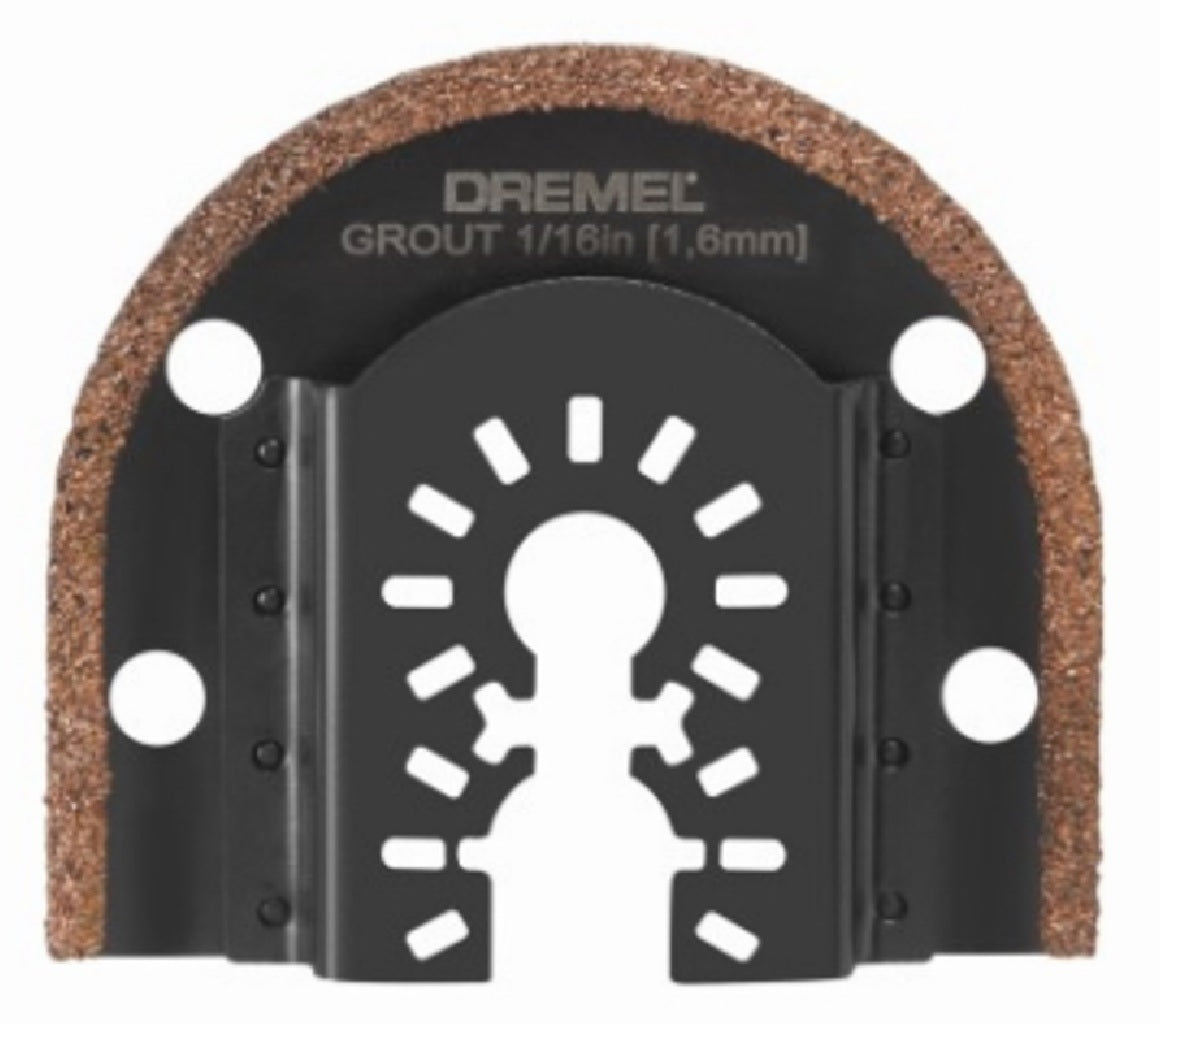 Dremel MM501U Universal Dual Interface Oscillating Grout Removal Blade, 1/16 Inch